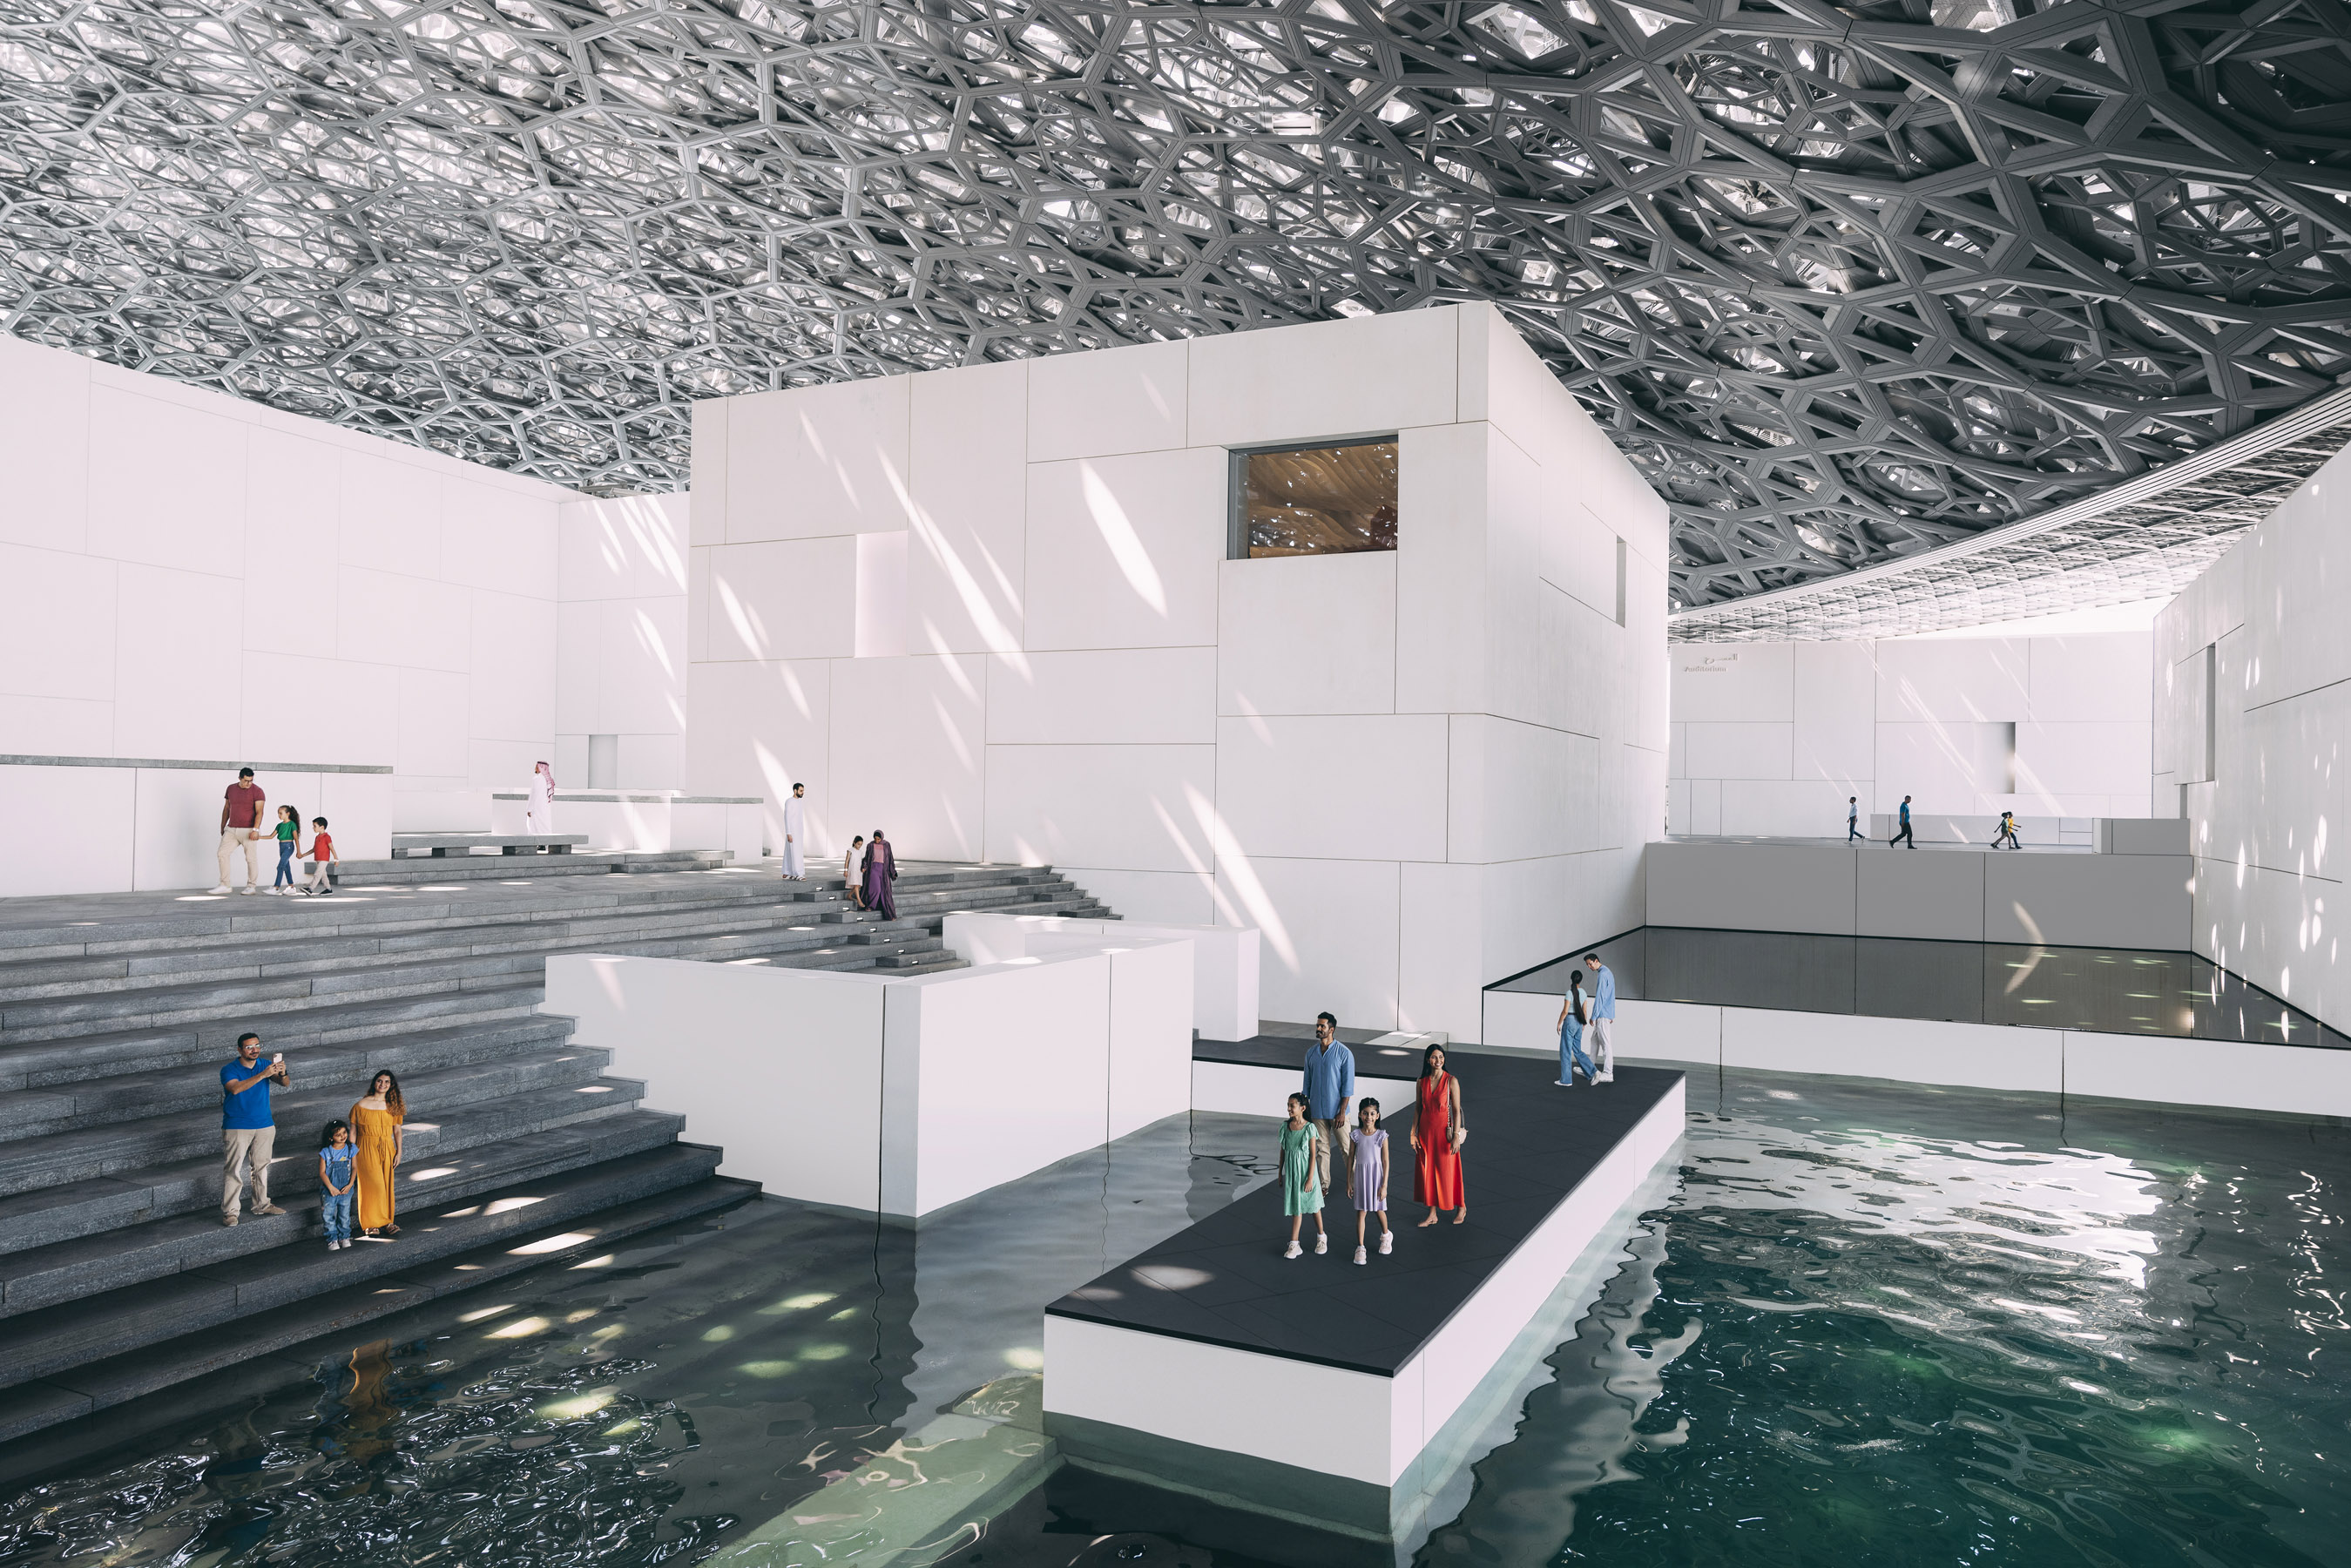 One of Abu Dhabi’s most iconic landmarks, Louvre Abu Dhabi is the region’s first universal museum, exploring the links between global civilisations through time and revealing stories of cultural connections